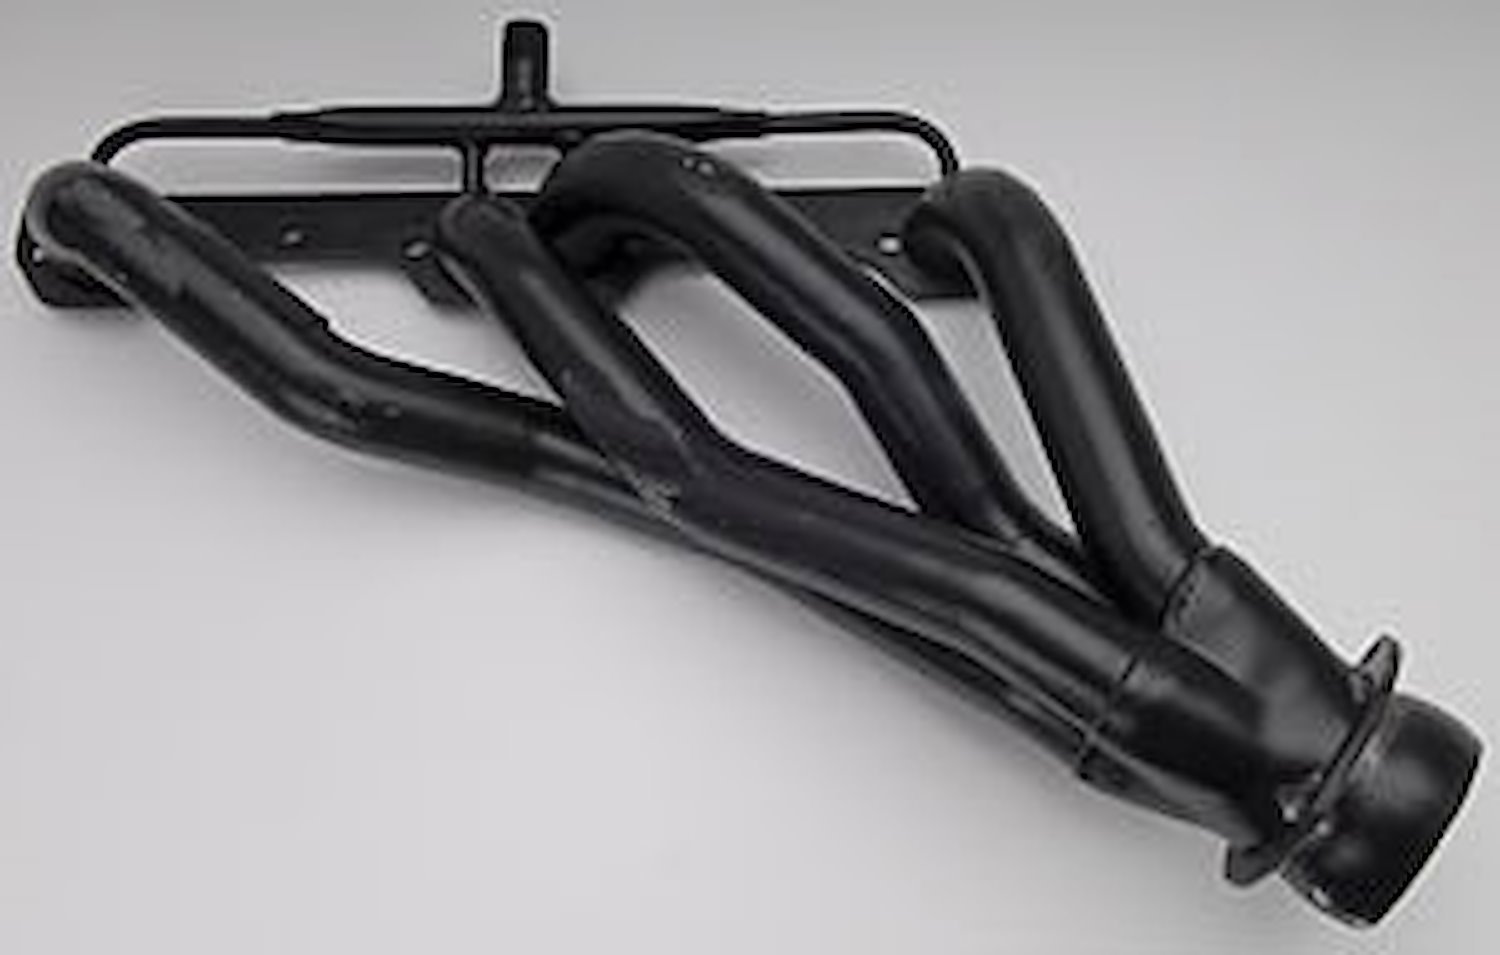 Standard Duty Uncoated Shorty Headers for 1964-94 Passenger Car 283-400